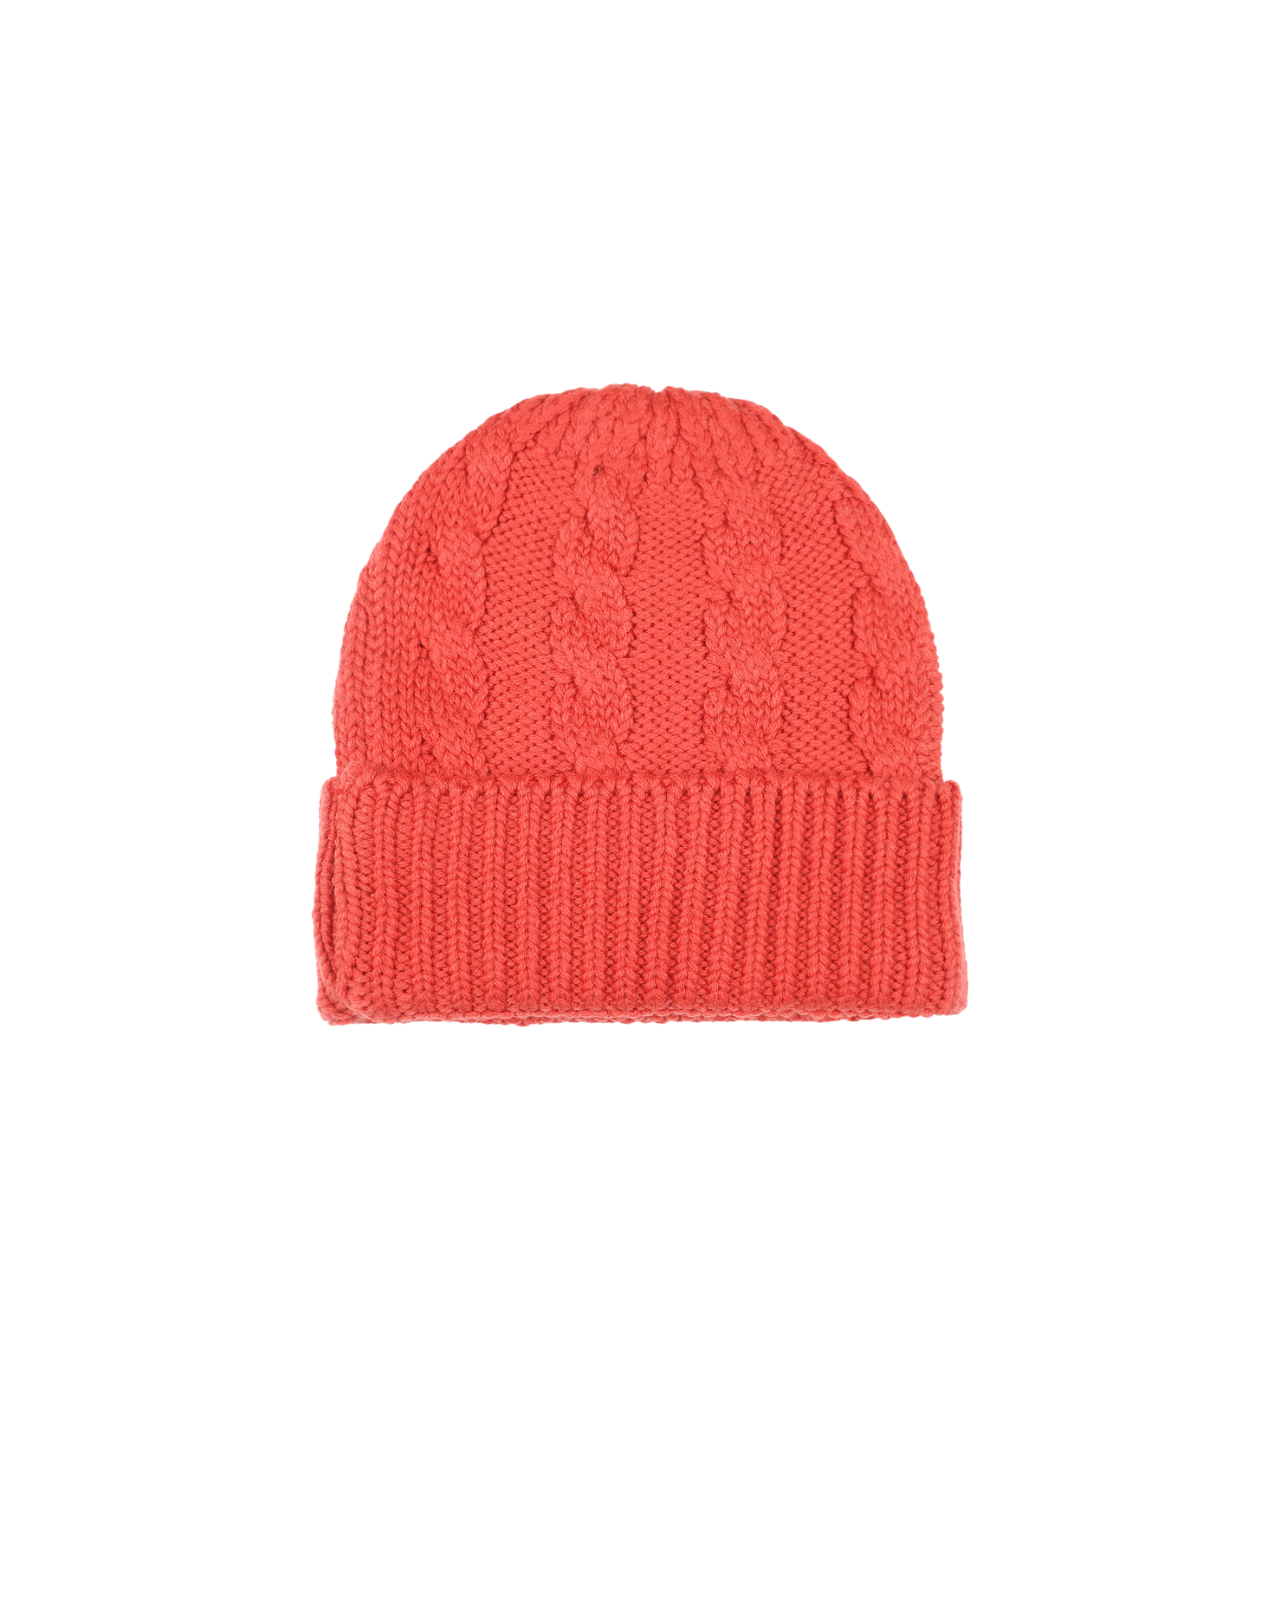 Acrylic Wool Cable Knit Winter Beanie For Women